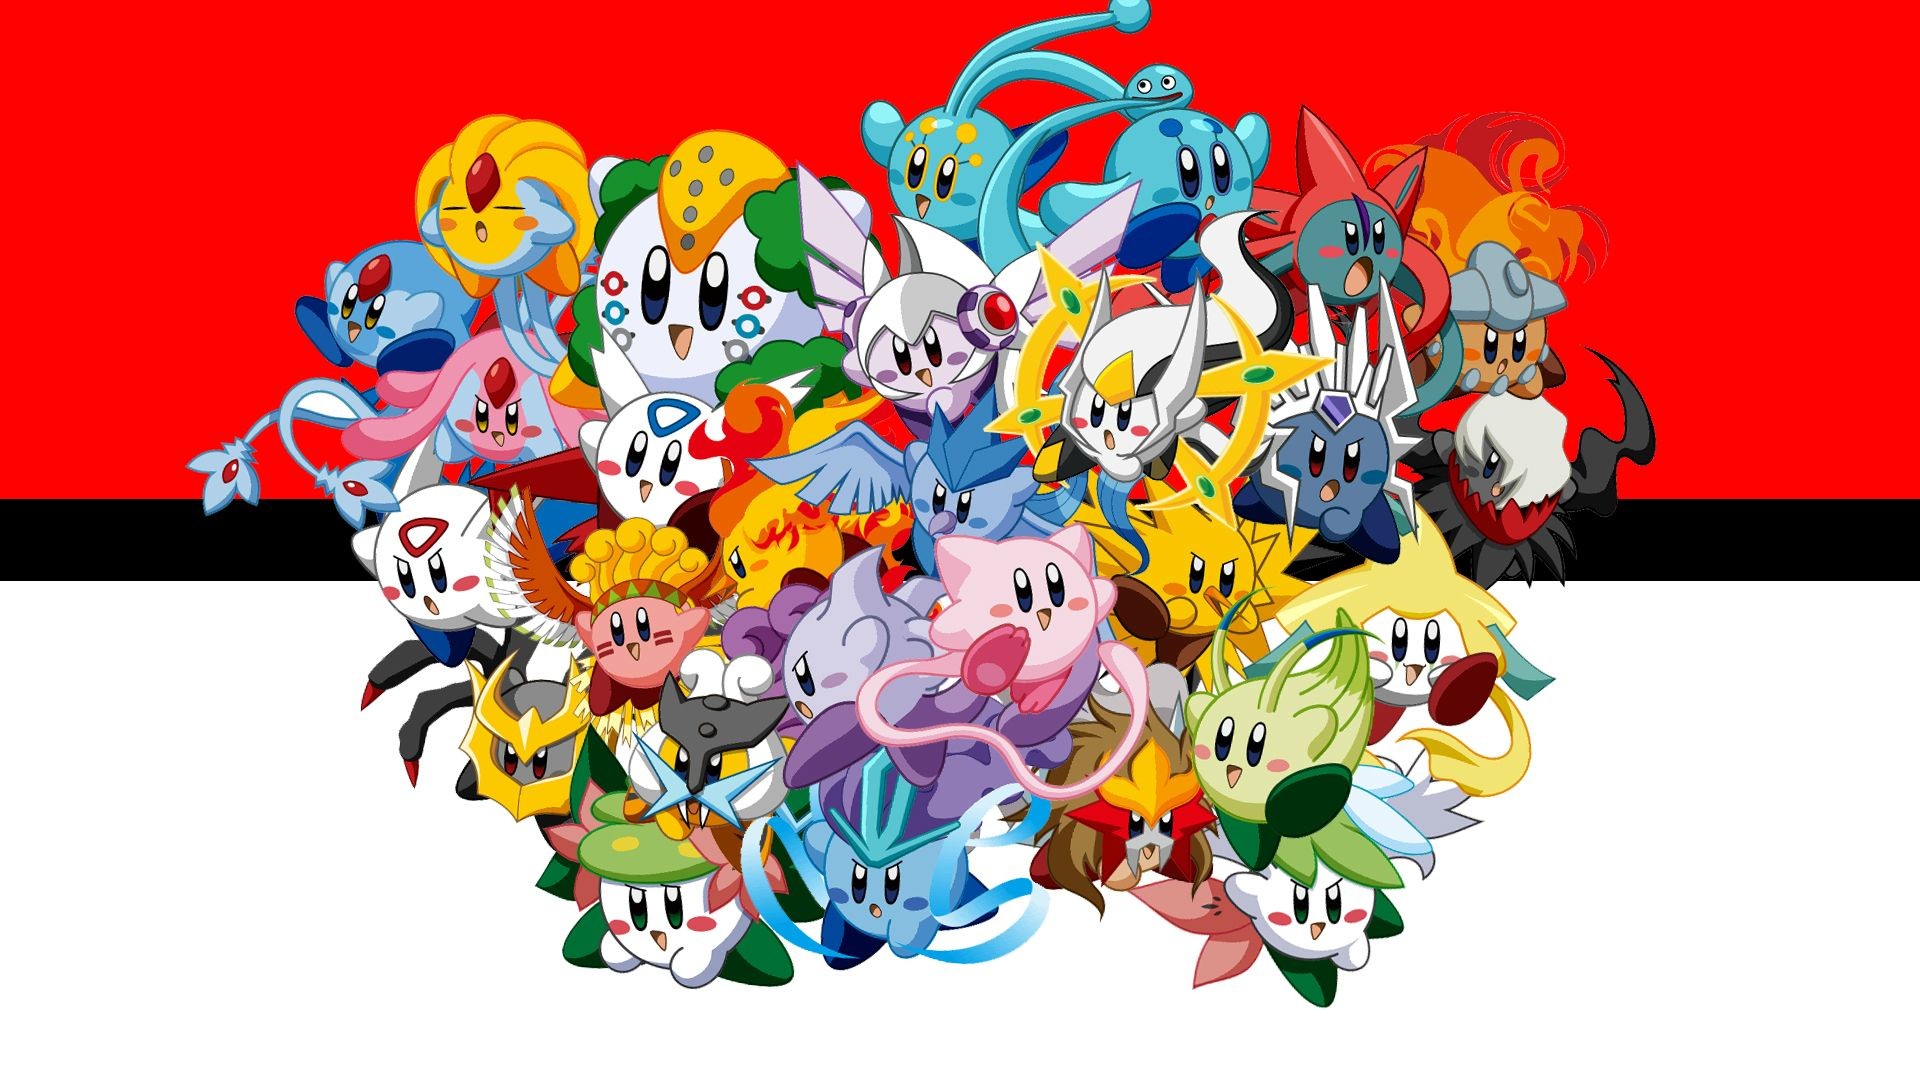 1920x1080 I made a wallpaper with Kirby as (most of) the Legendary PokÃ©mon